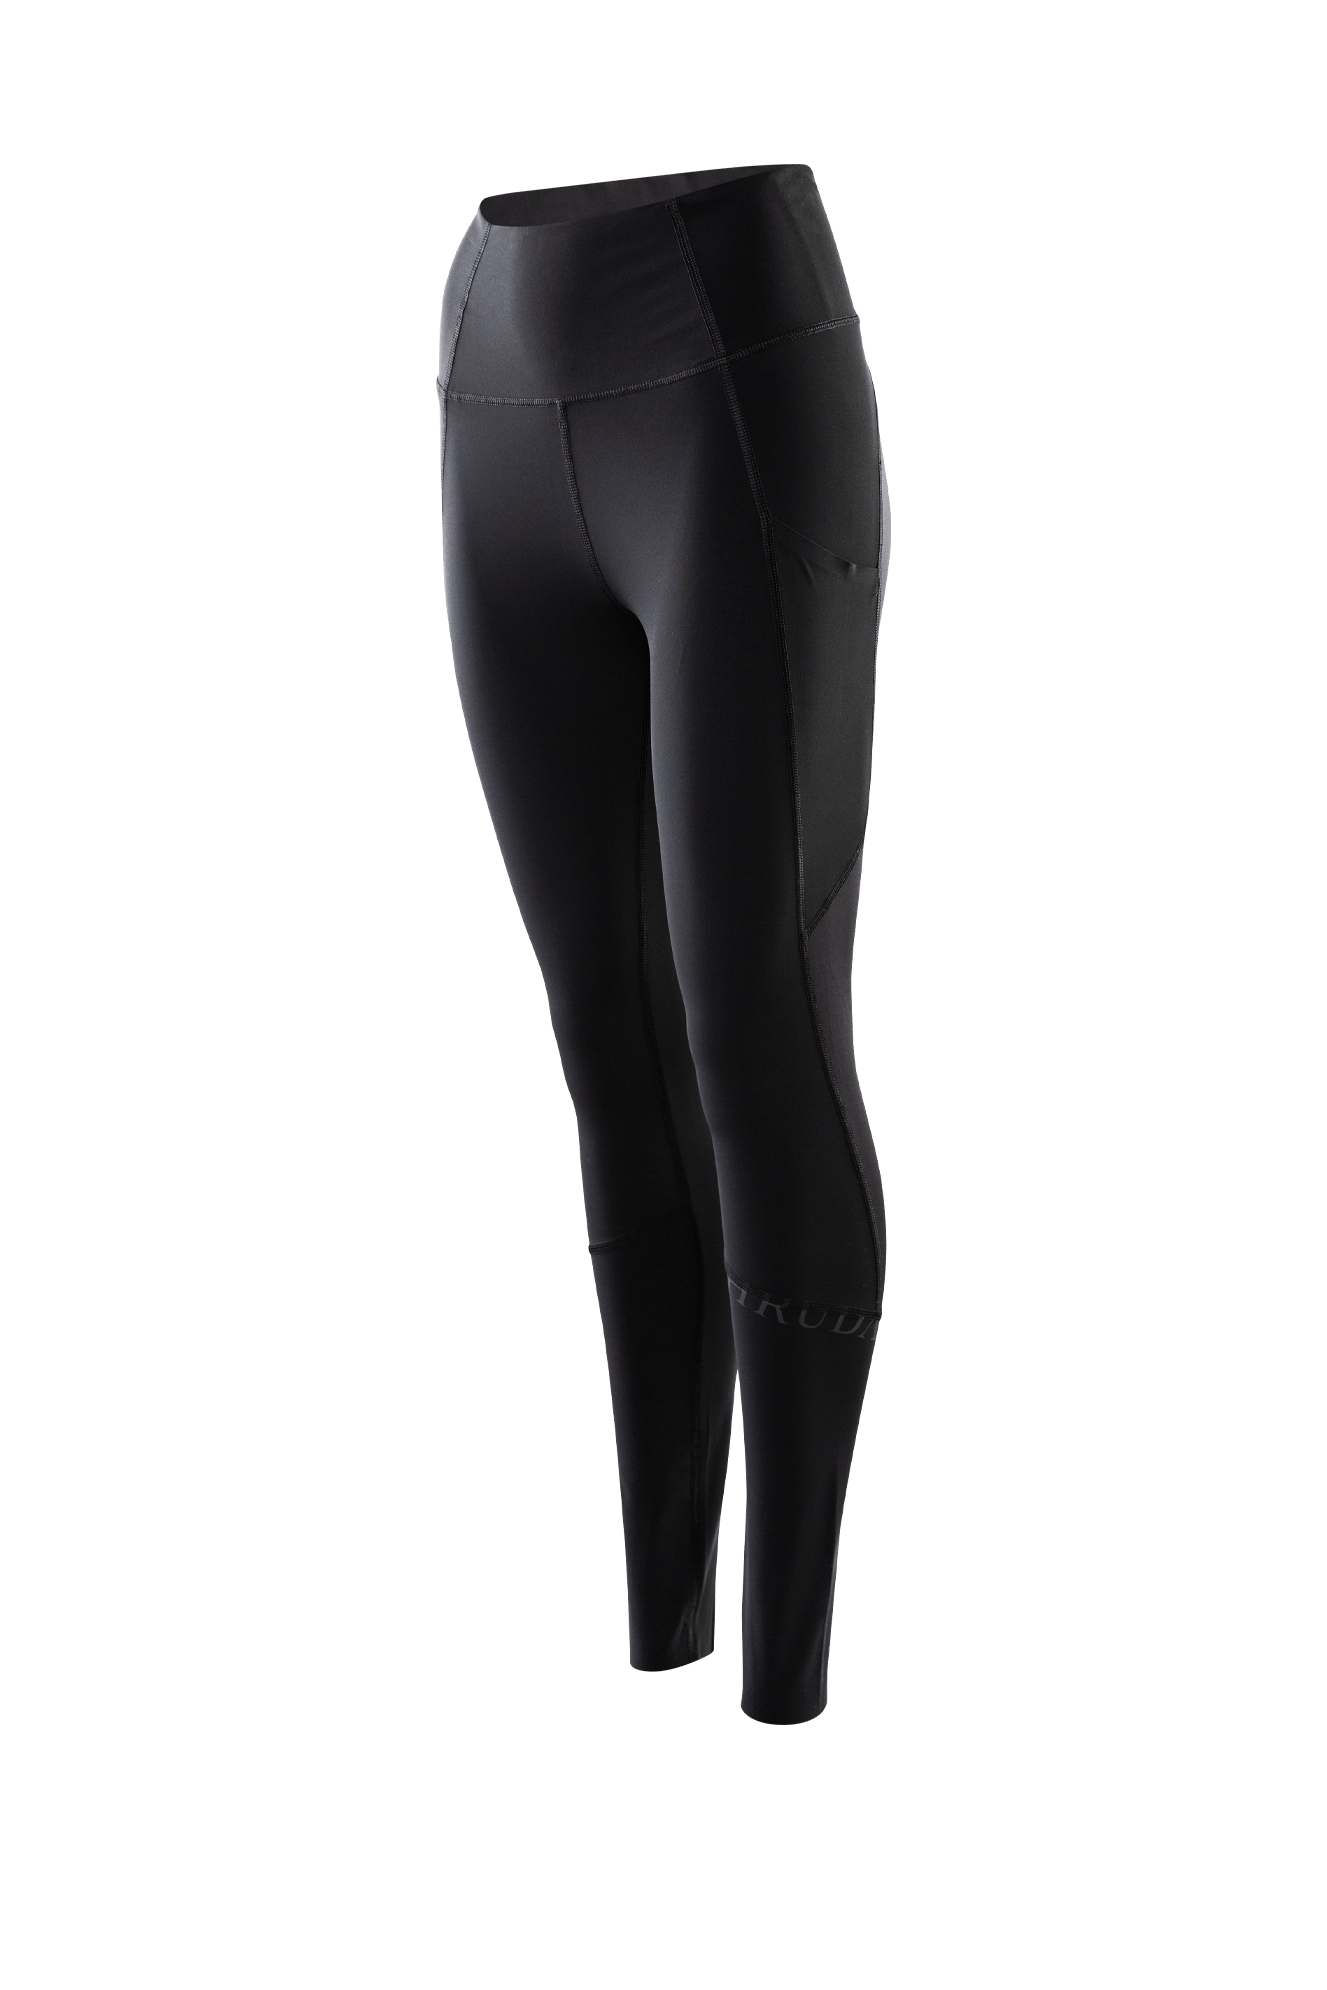 FORCE TECH LEGGINGS WOMENS | Running Leggings for workouts or gym